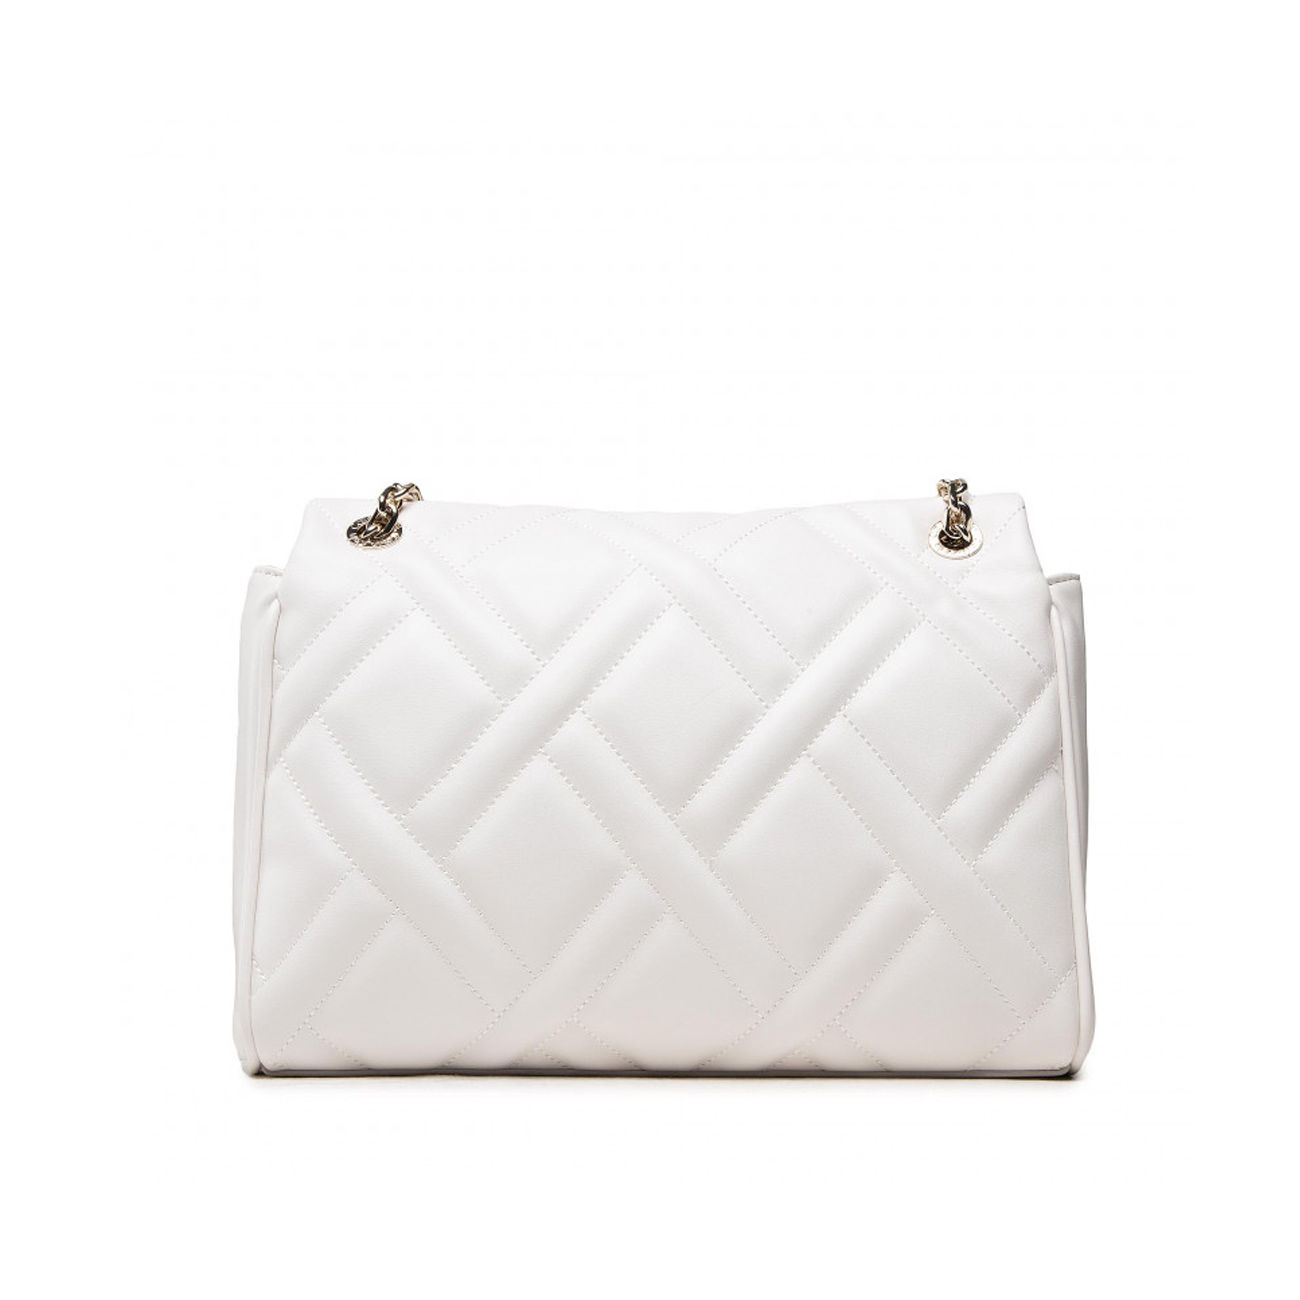 CALVIN KLEIN QUILTED LEATHER SHOULDER CHAIN BAG